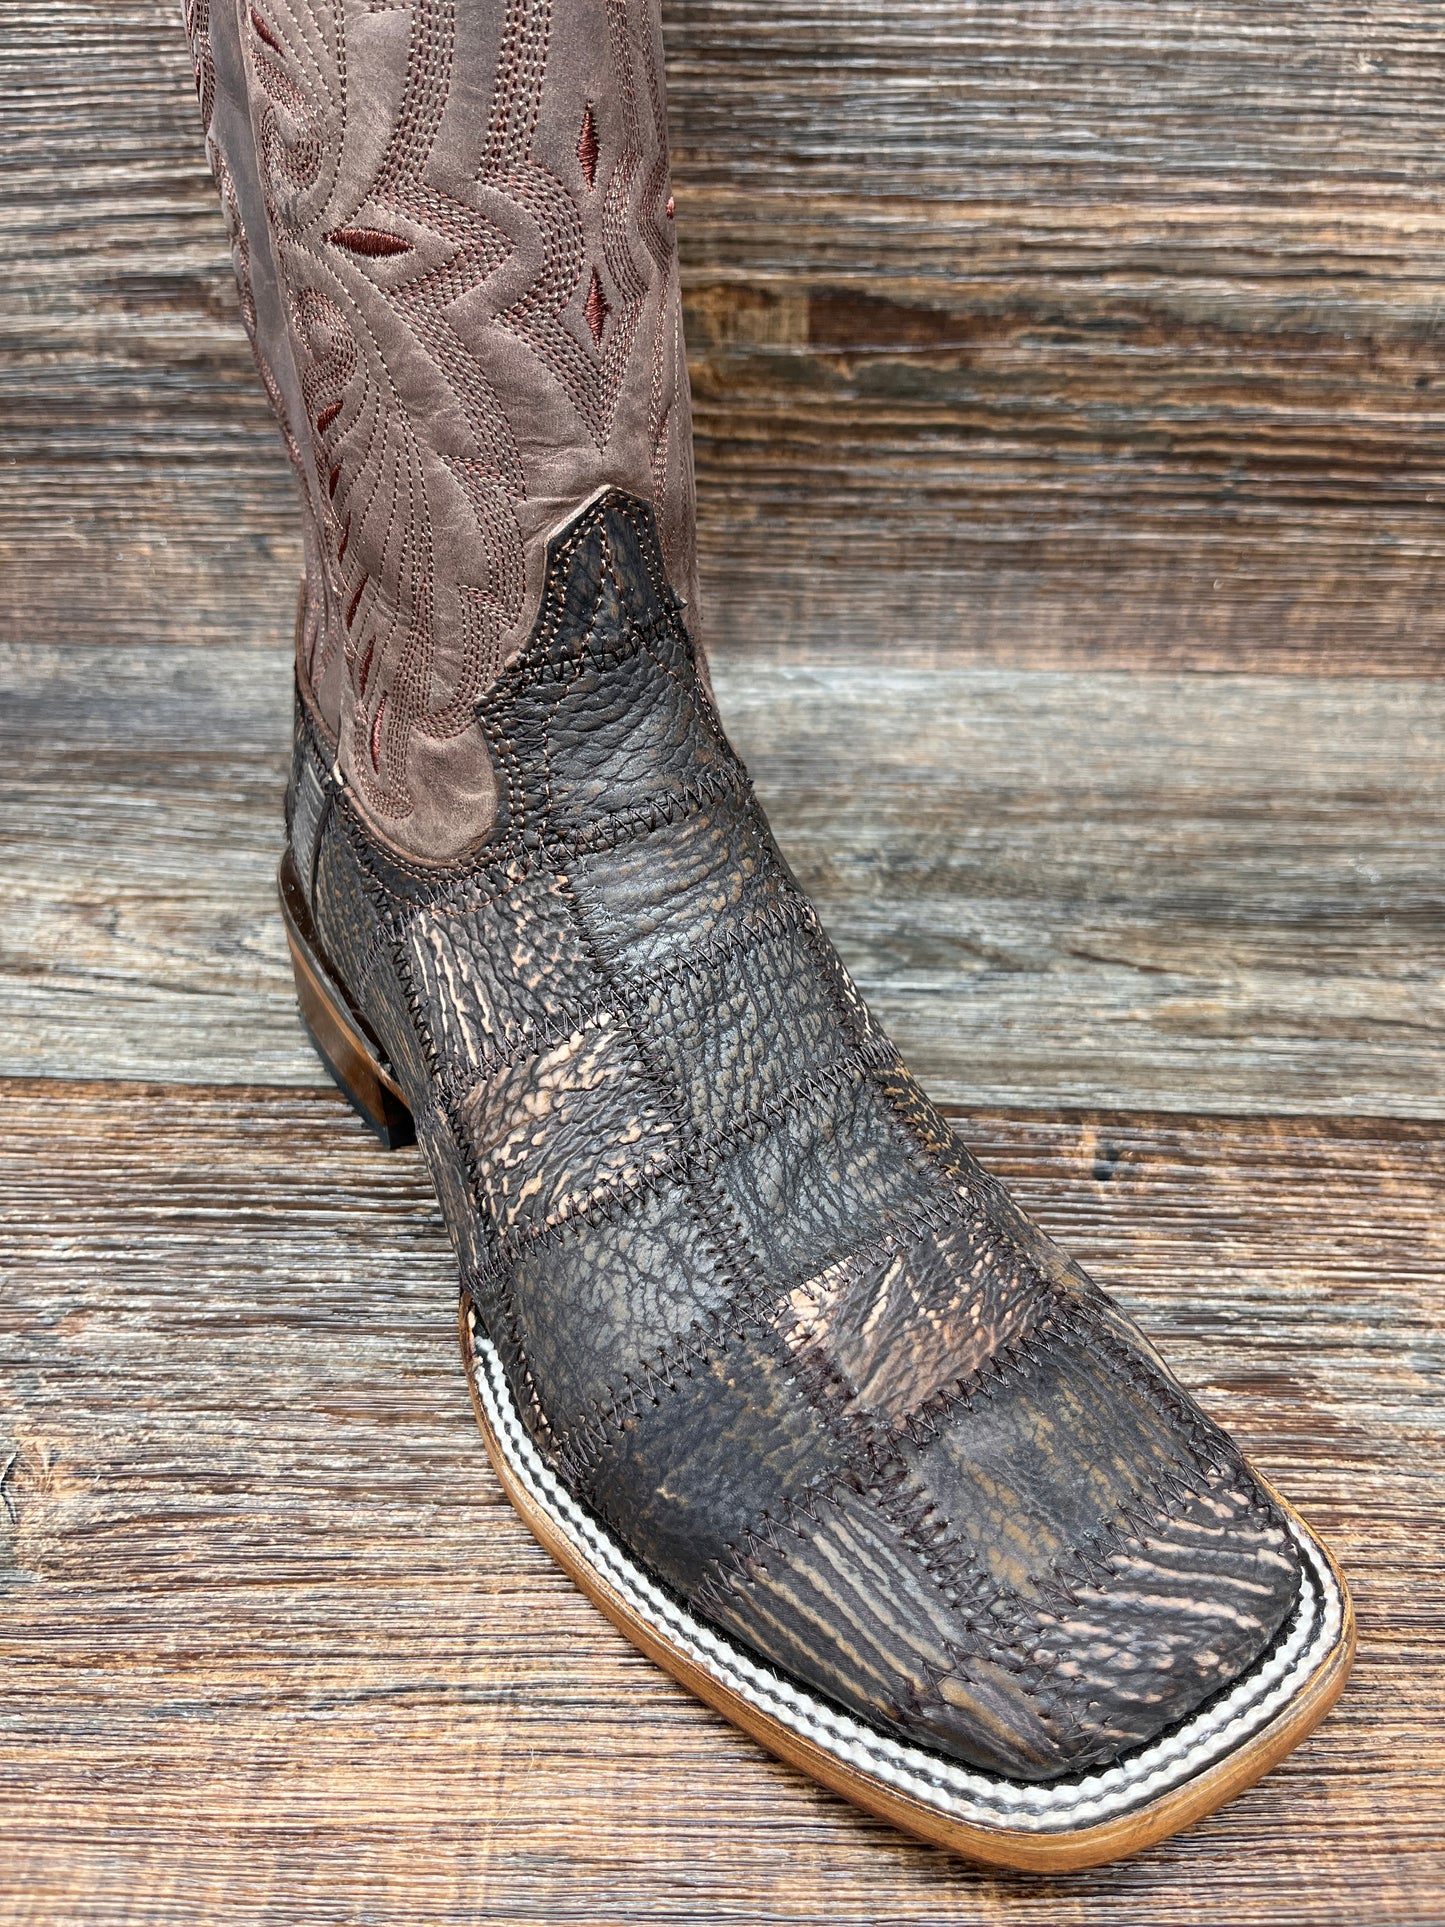 l5951 Men's Circle-G Patchwork Shark Skin Square Toe Western Boots by Corral